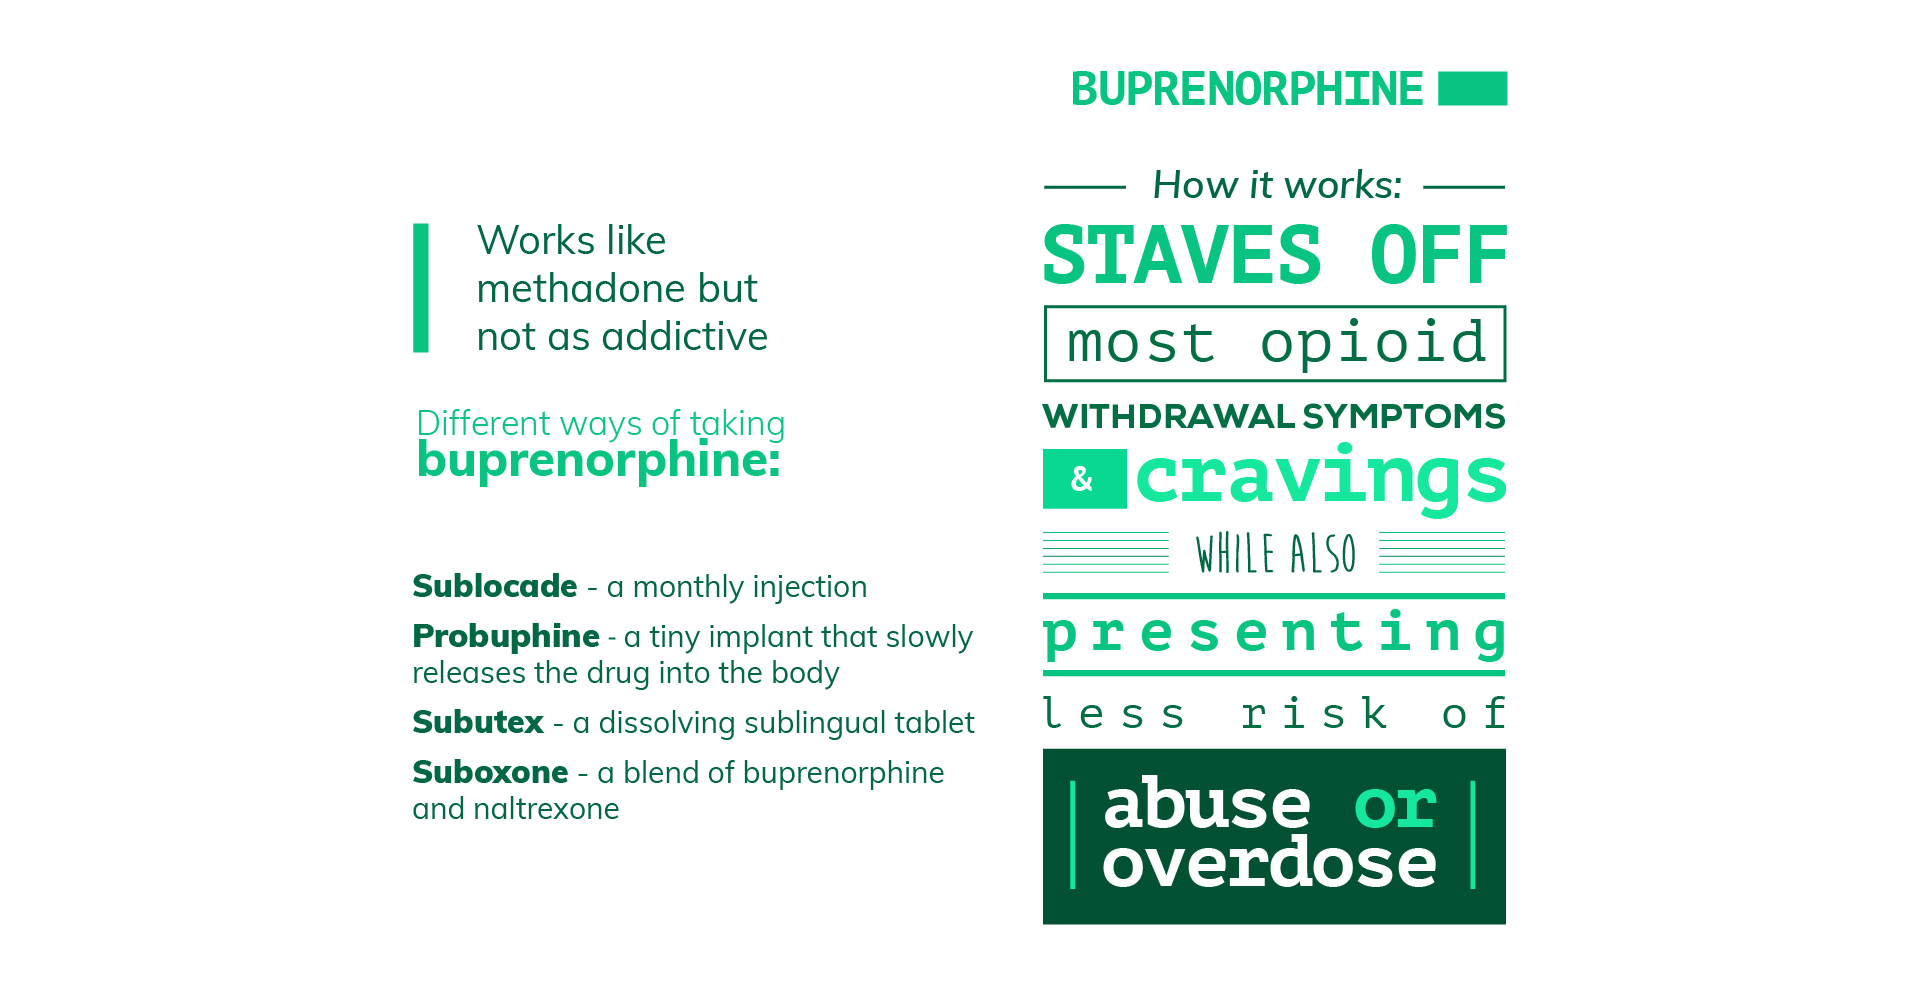 Medications Used in ORT Buprenorphine